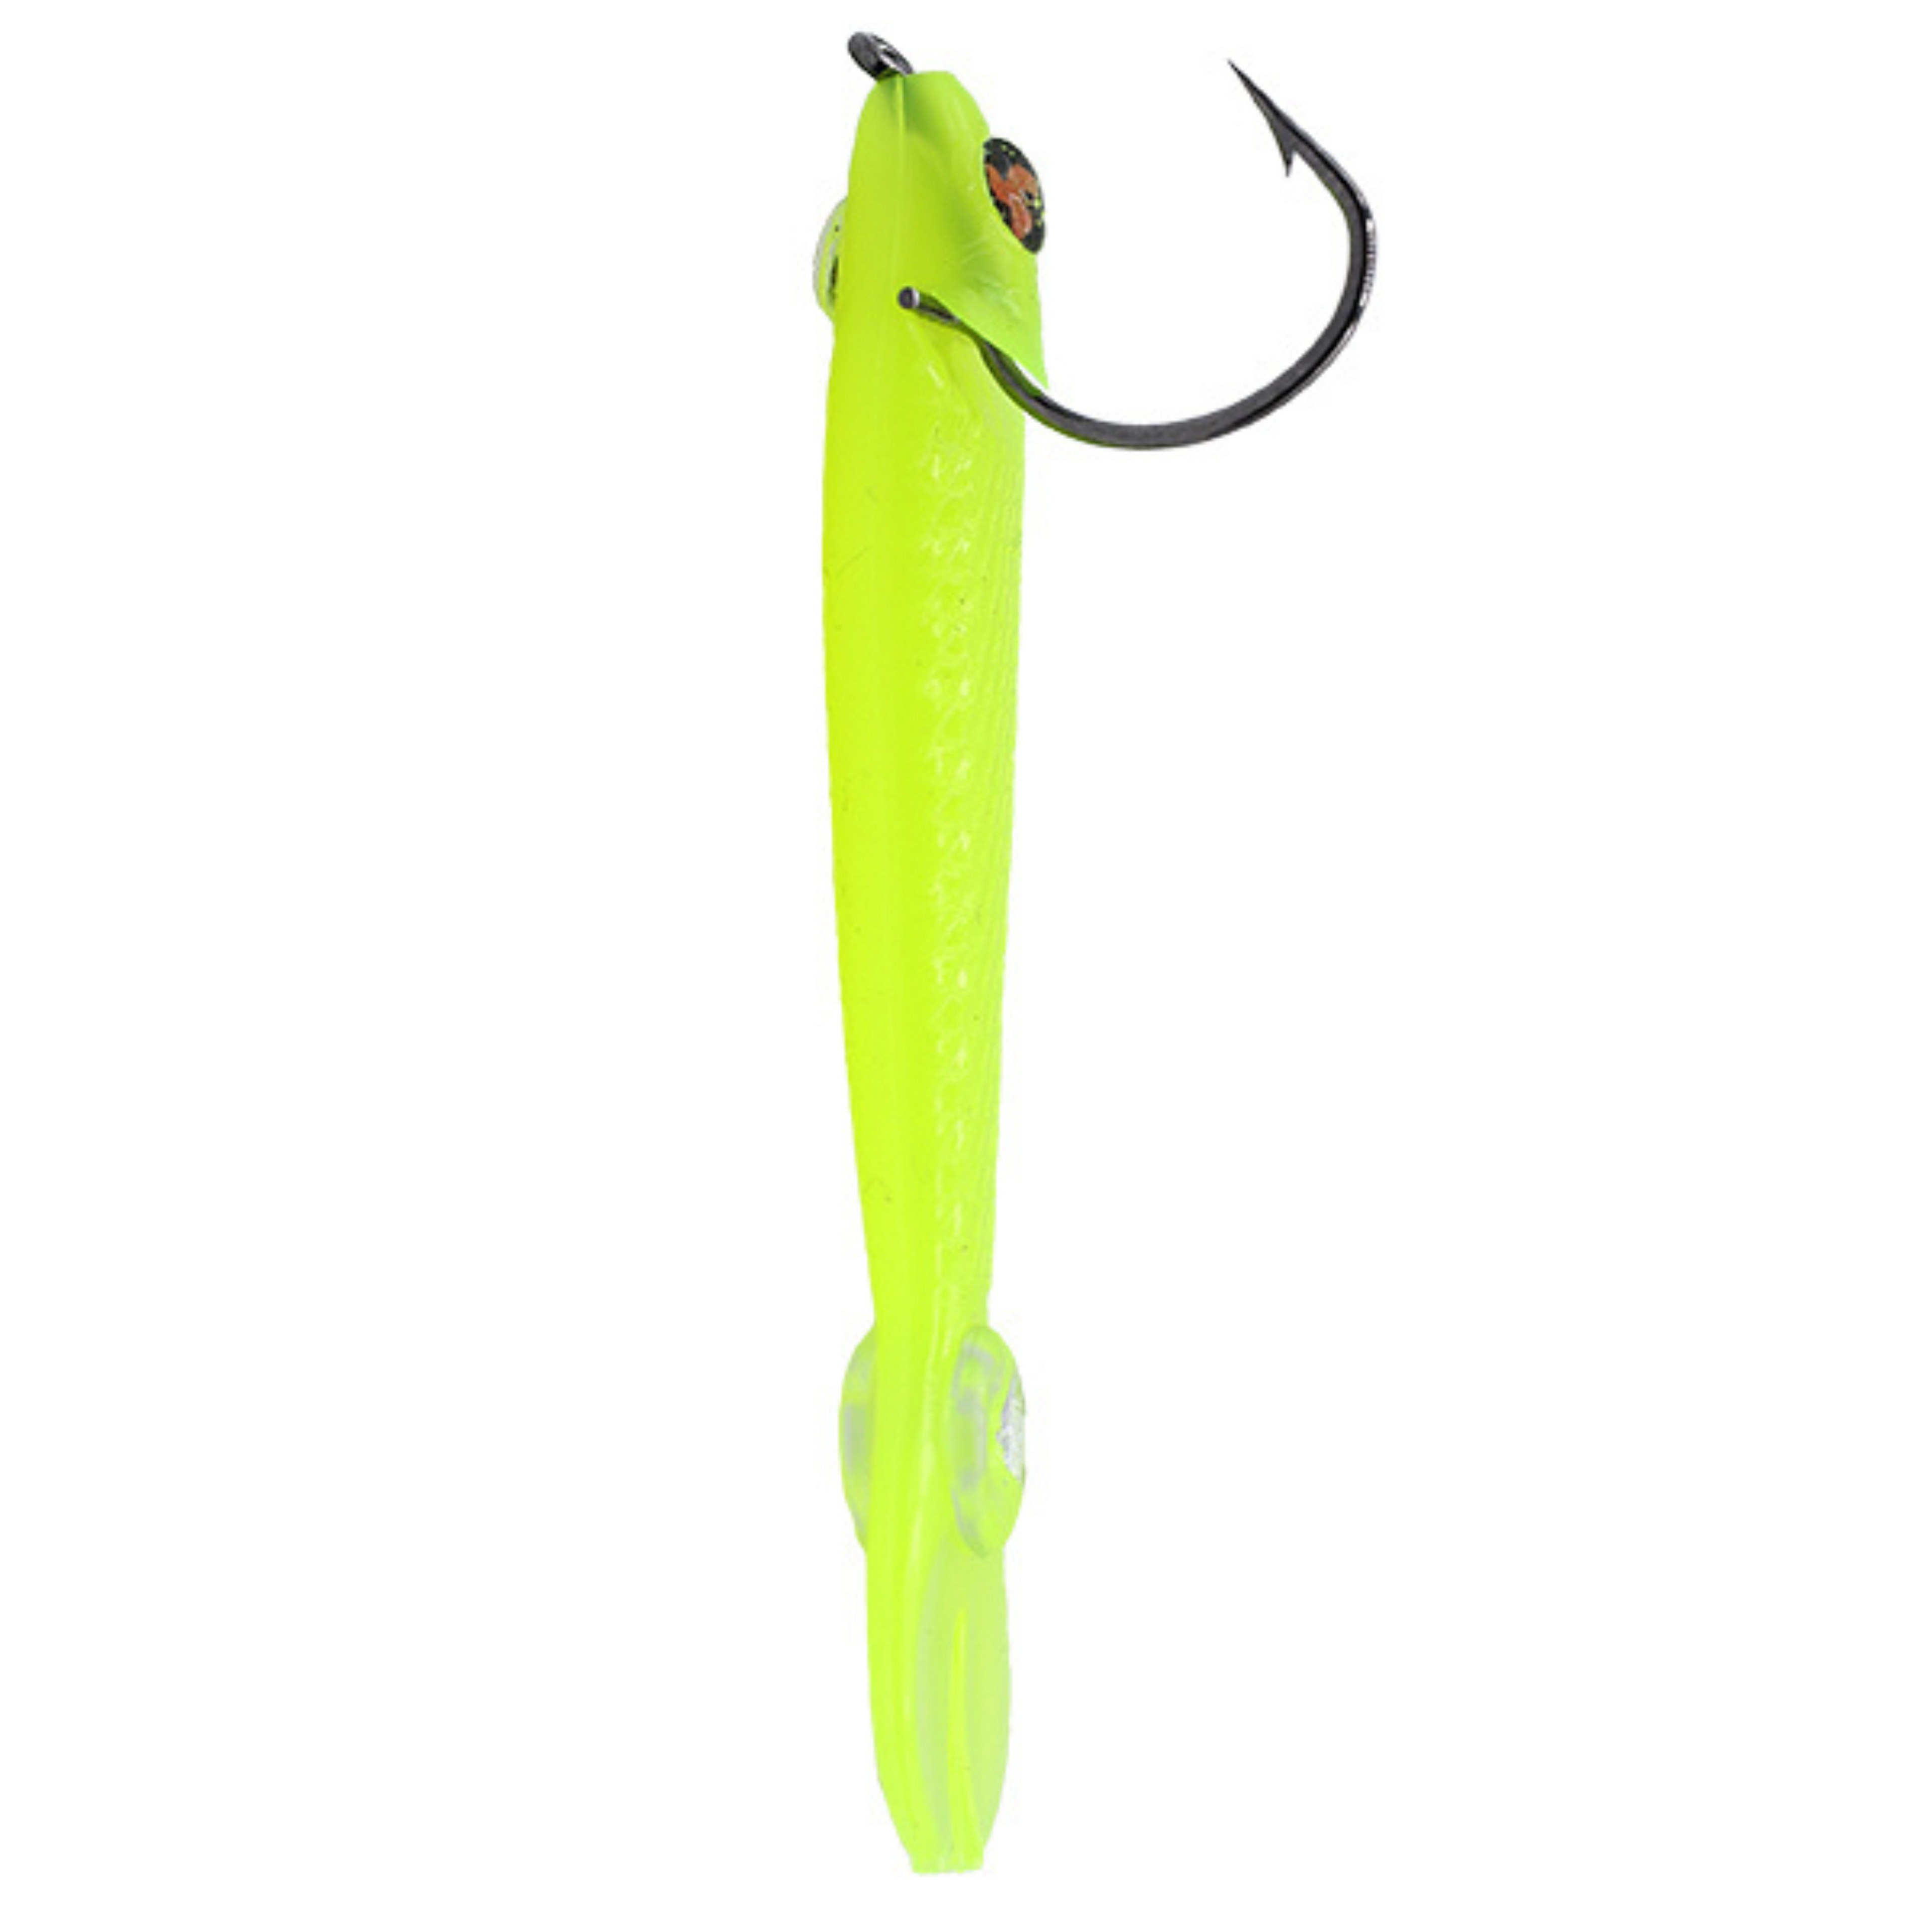 Lawless Lures 3.25 5pc. Recoil Baits - Chartreuse on Marmalade